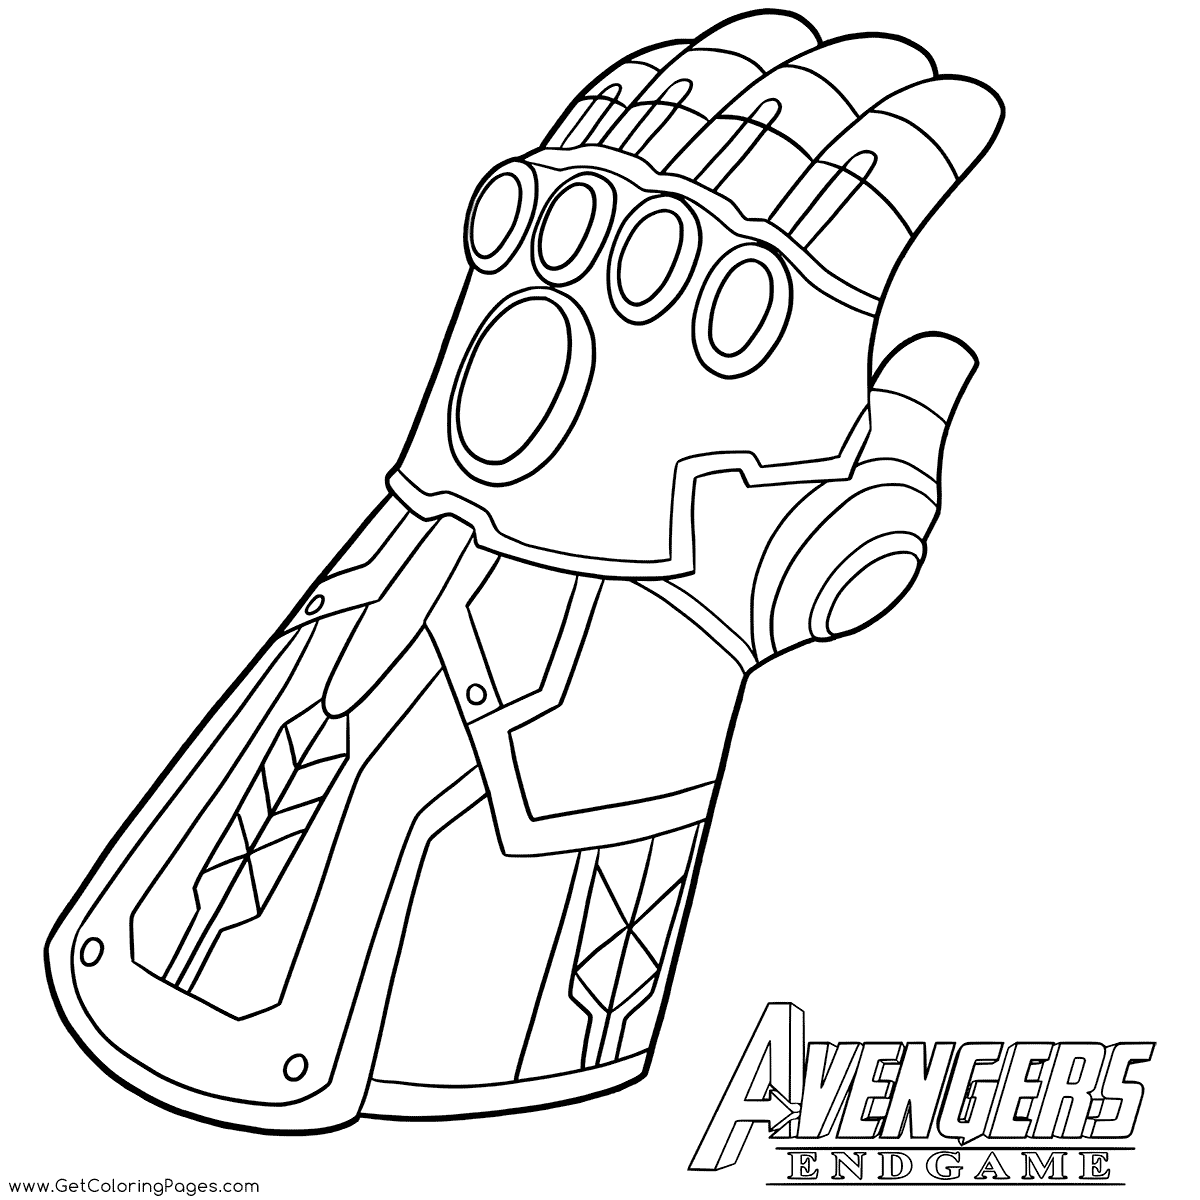 Thanos Infinity Gauntlet Coloring Page - Get Coloring Pages